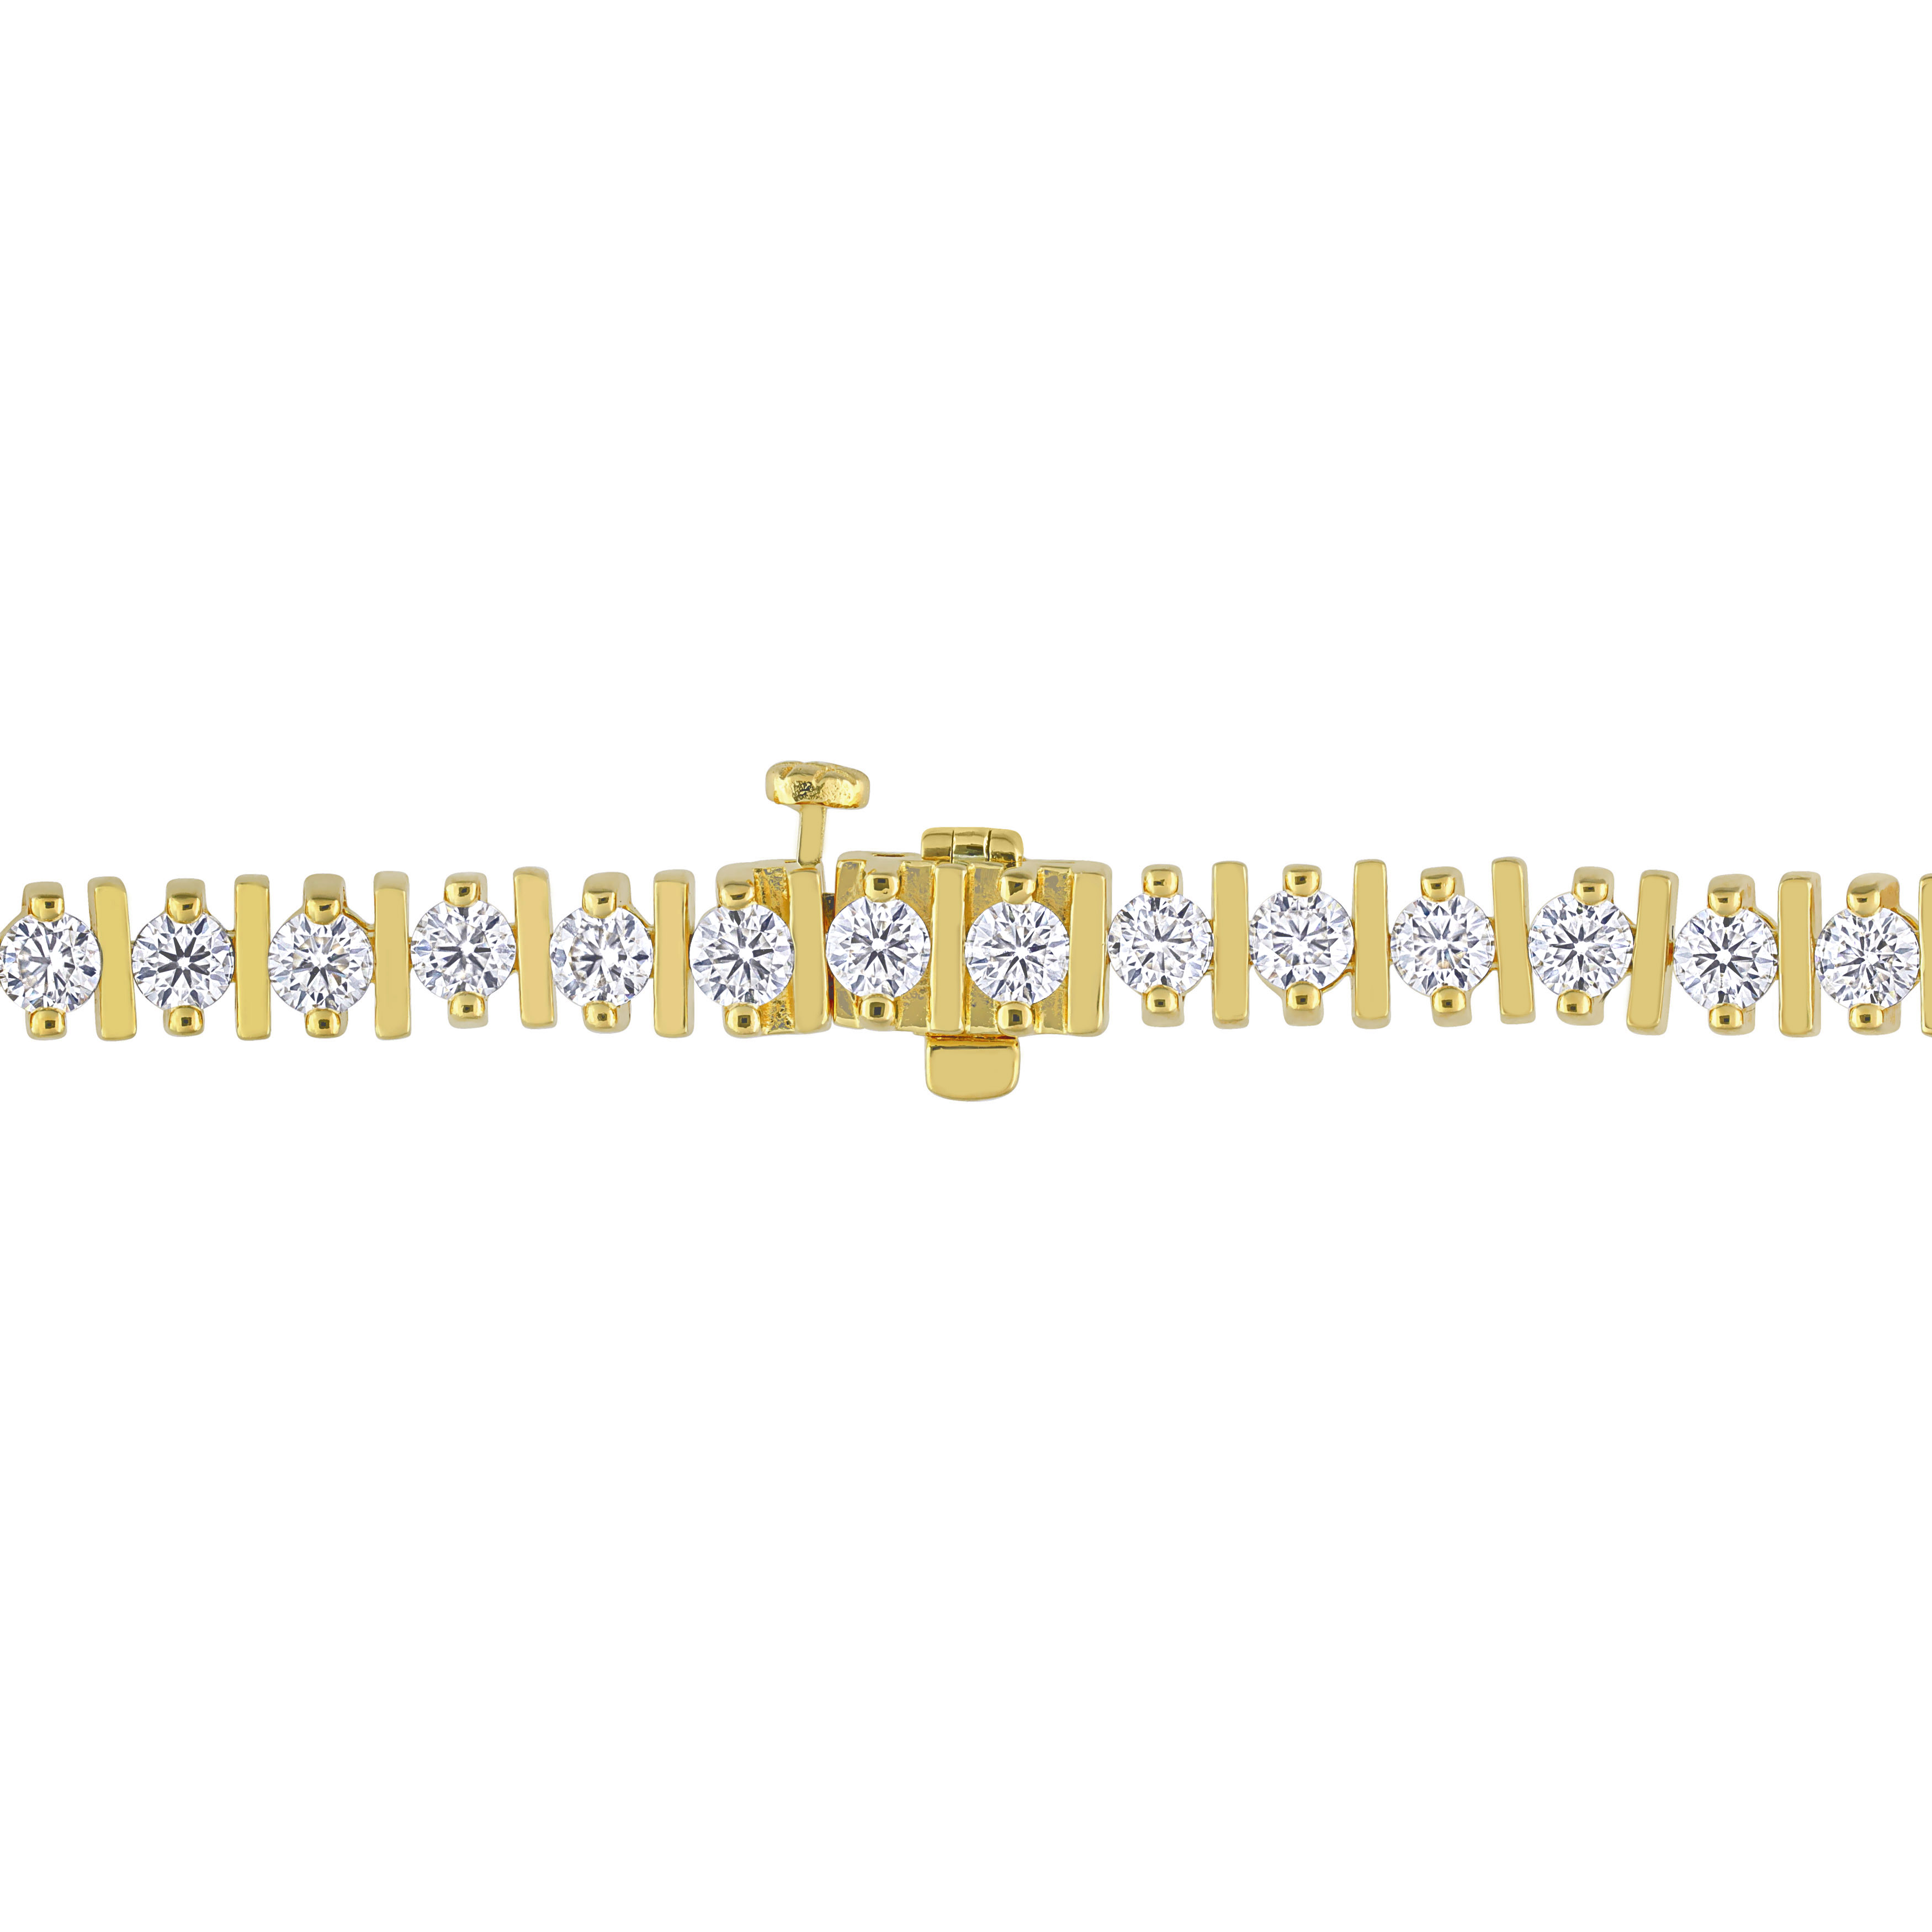 4 1/2 CT DEW Created Moissanite Bar Tennis Bracelet in Yellow Plated Sterling Silver - 7.25 in.